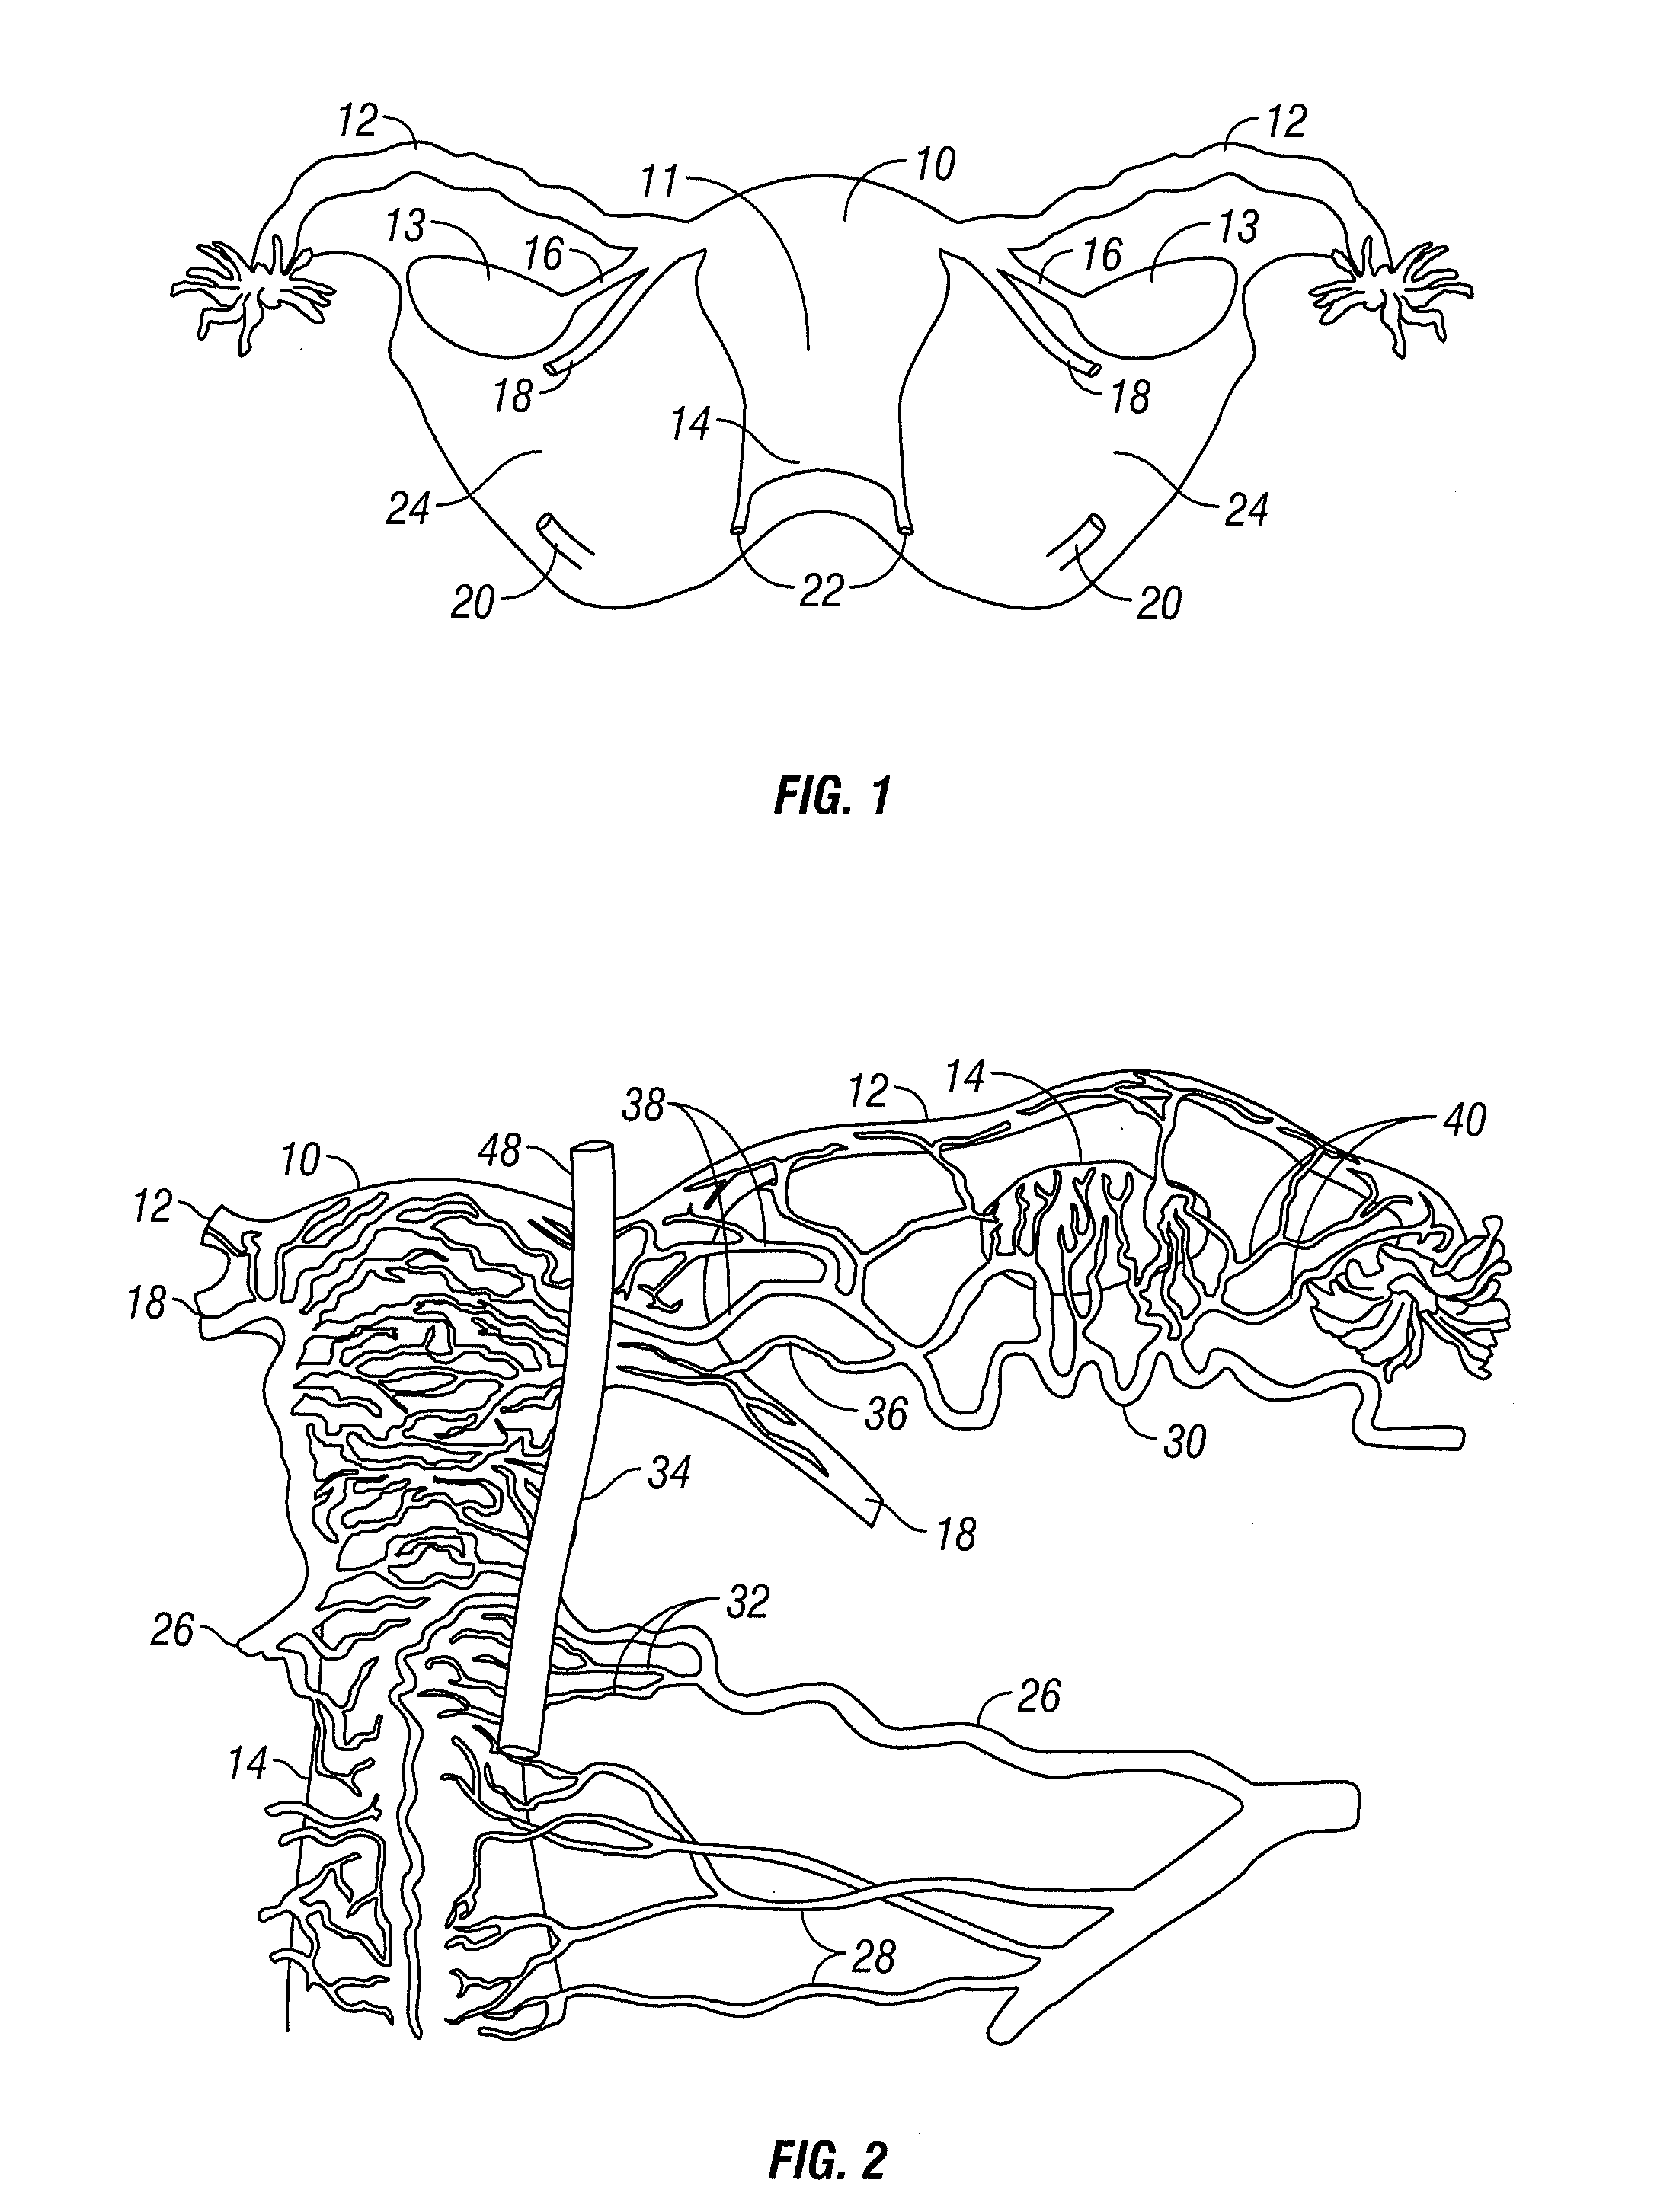 Method and apparatus for sealing tissue